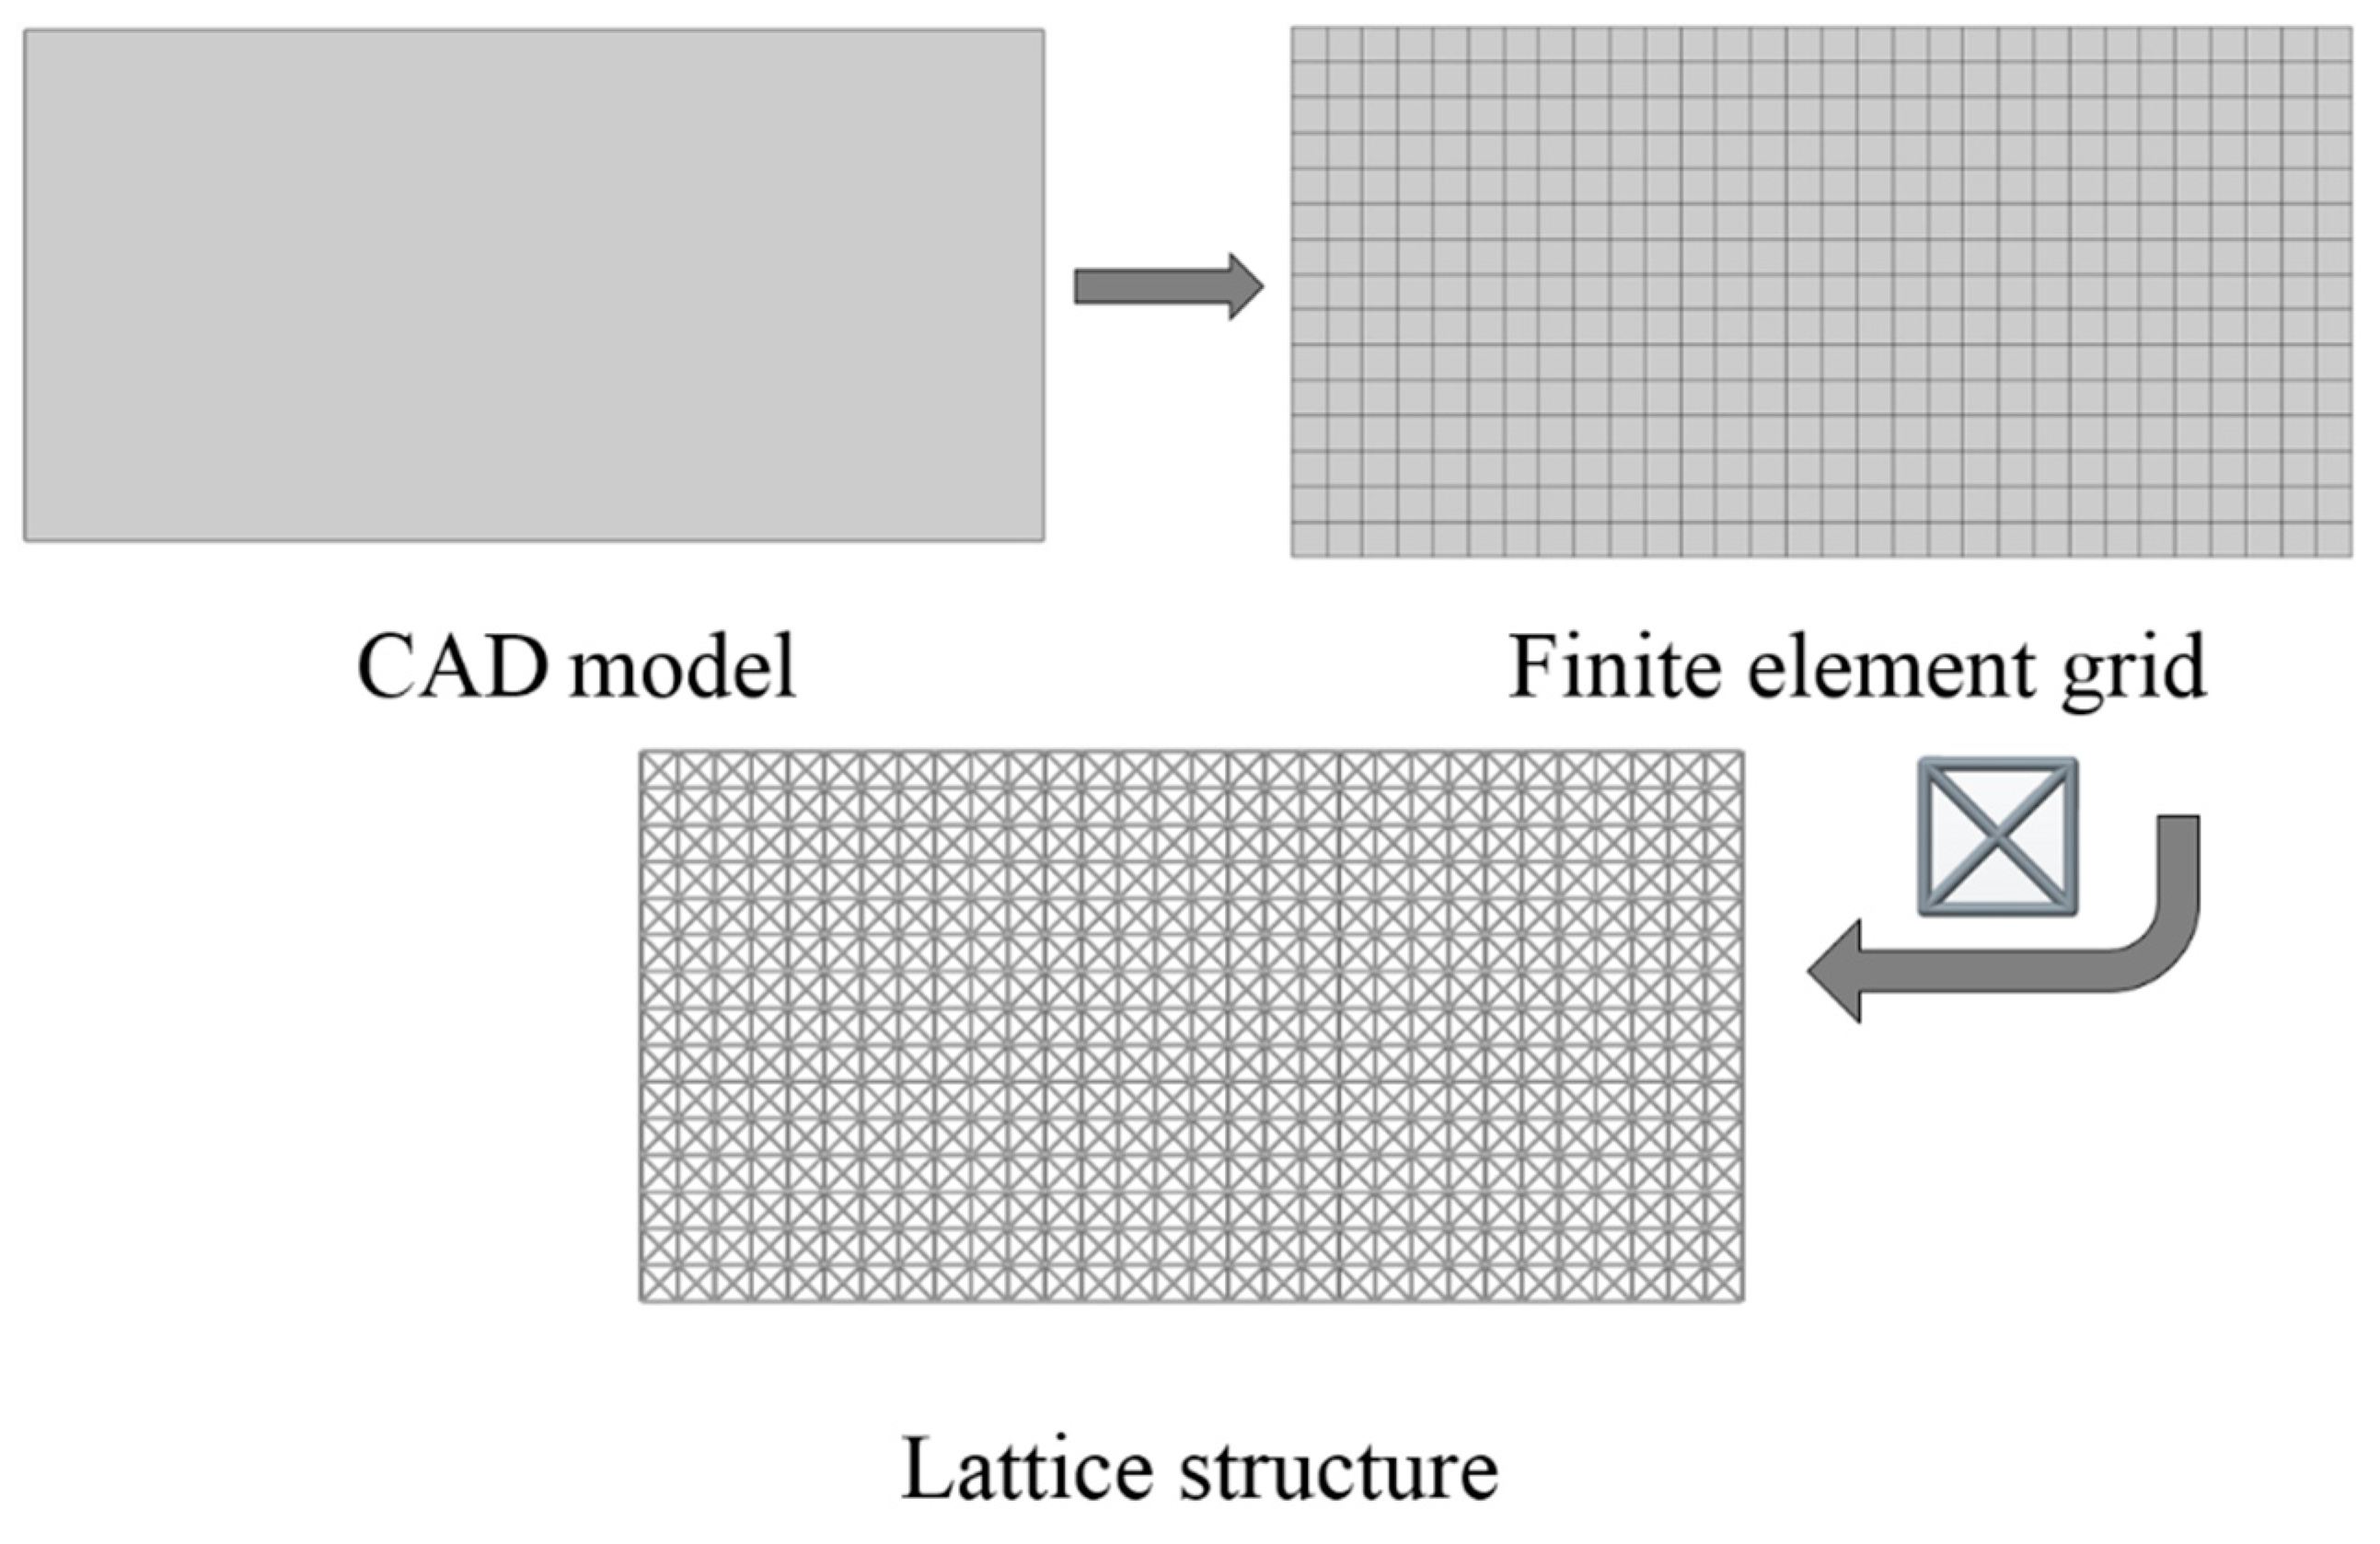 Benadrukken jungle relais Materials | Free Full-Text | Finite-Element-Mesh Based Method for Modeling  and Optimization of Lattice Structures for Additive Manufacturing